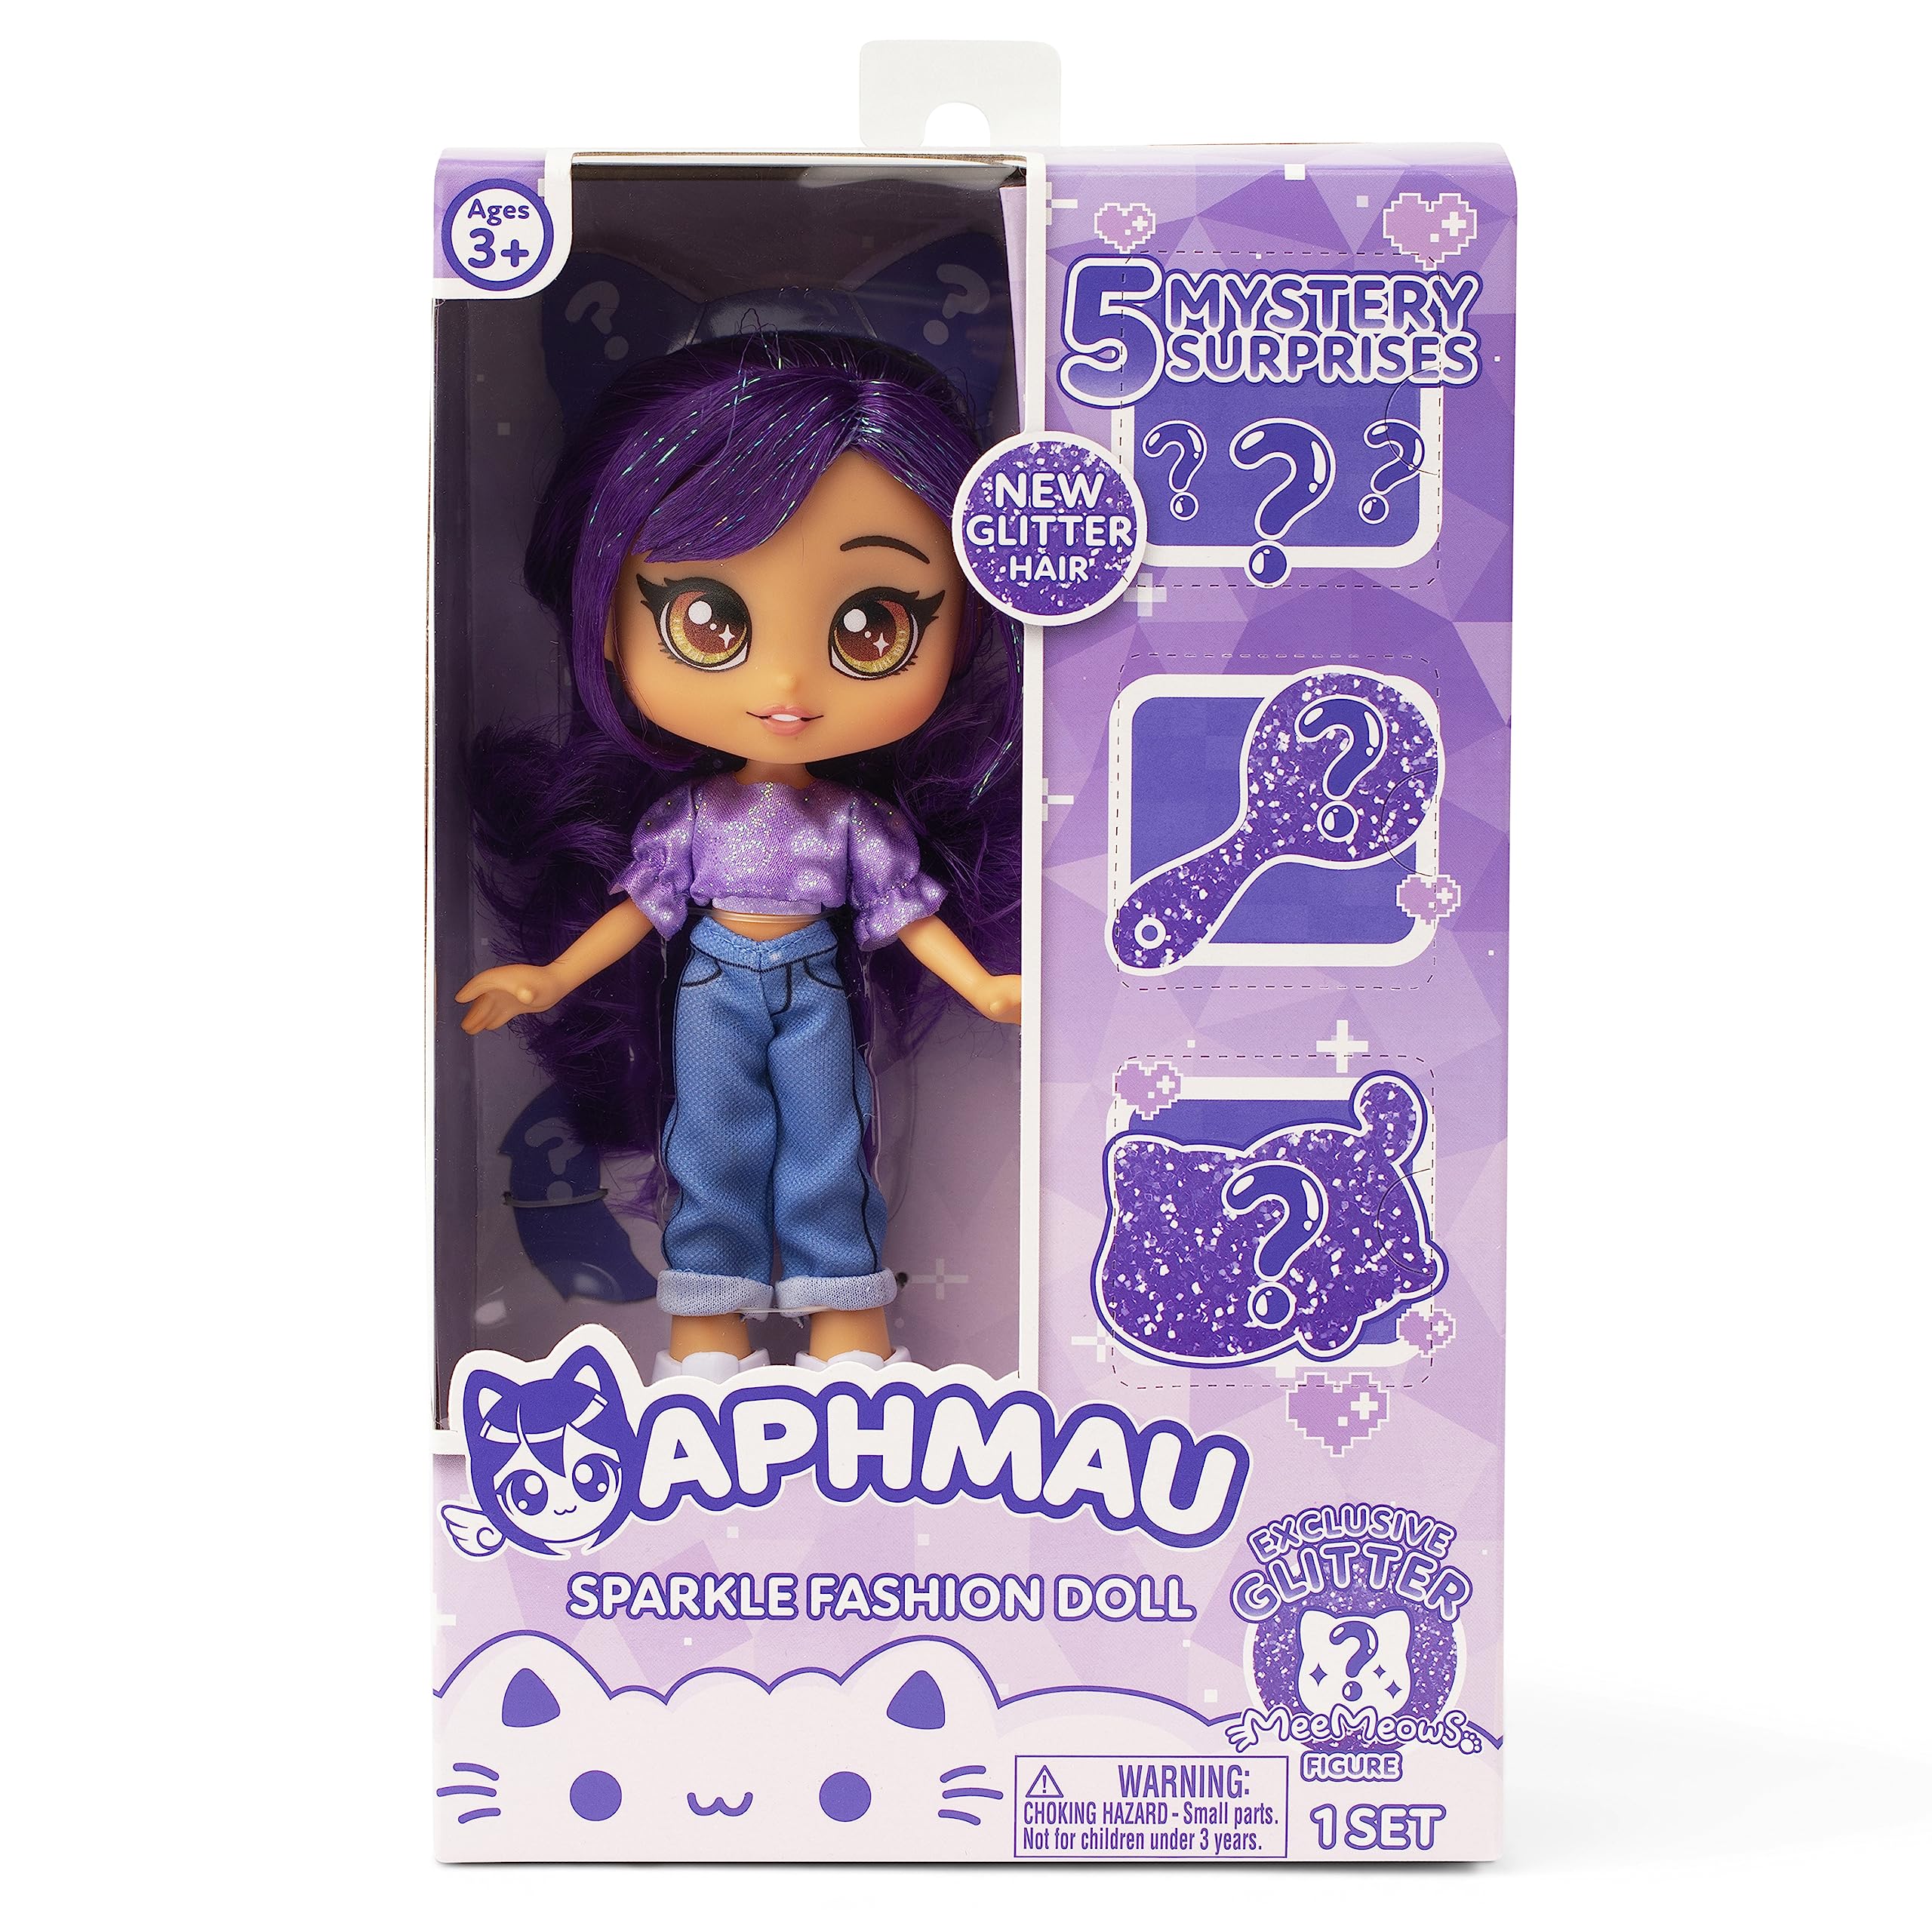 Aphmau Fashion Doll & Accessories Sparkle Edition, 5 Mystery Surprise Toys, Exclusive Glitter MeeMeows Mini Figure, Official Merch